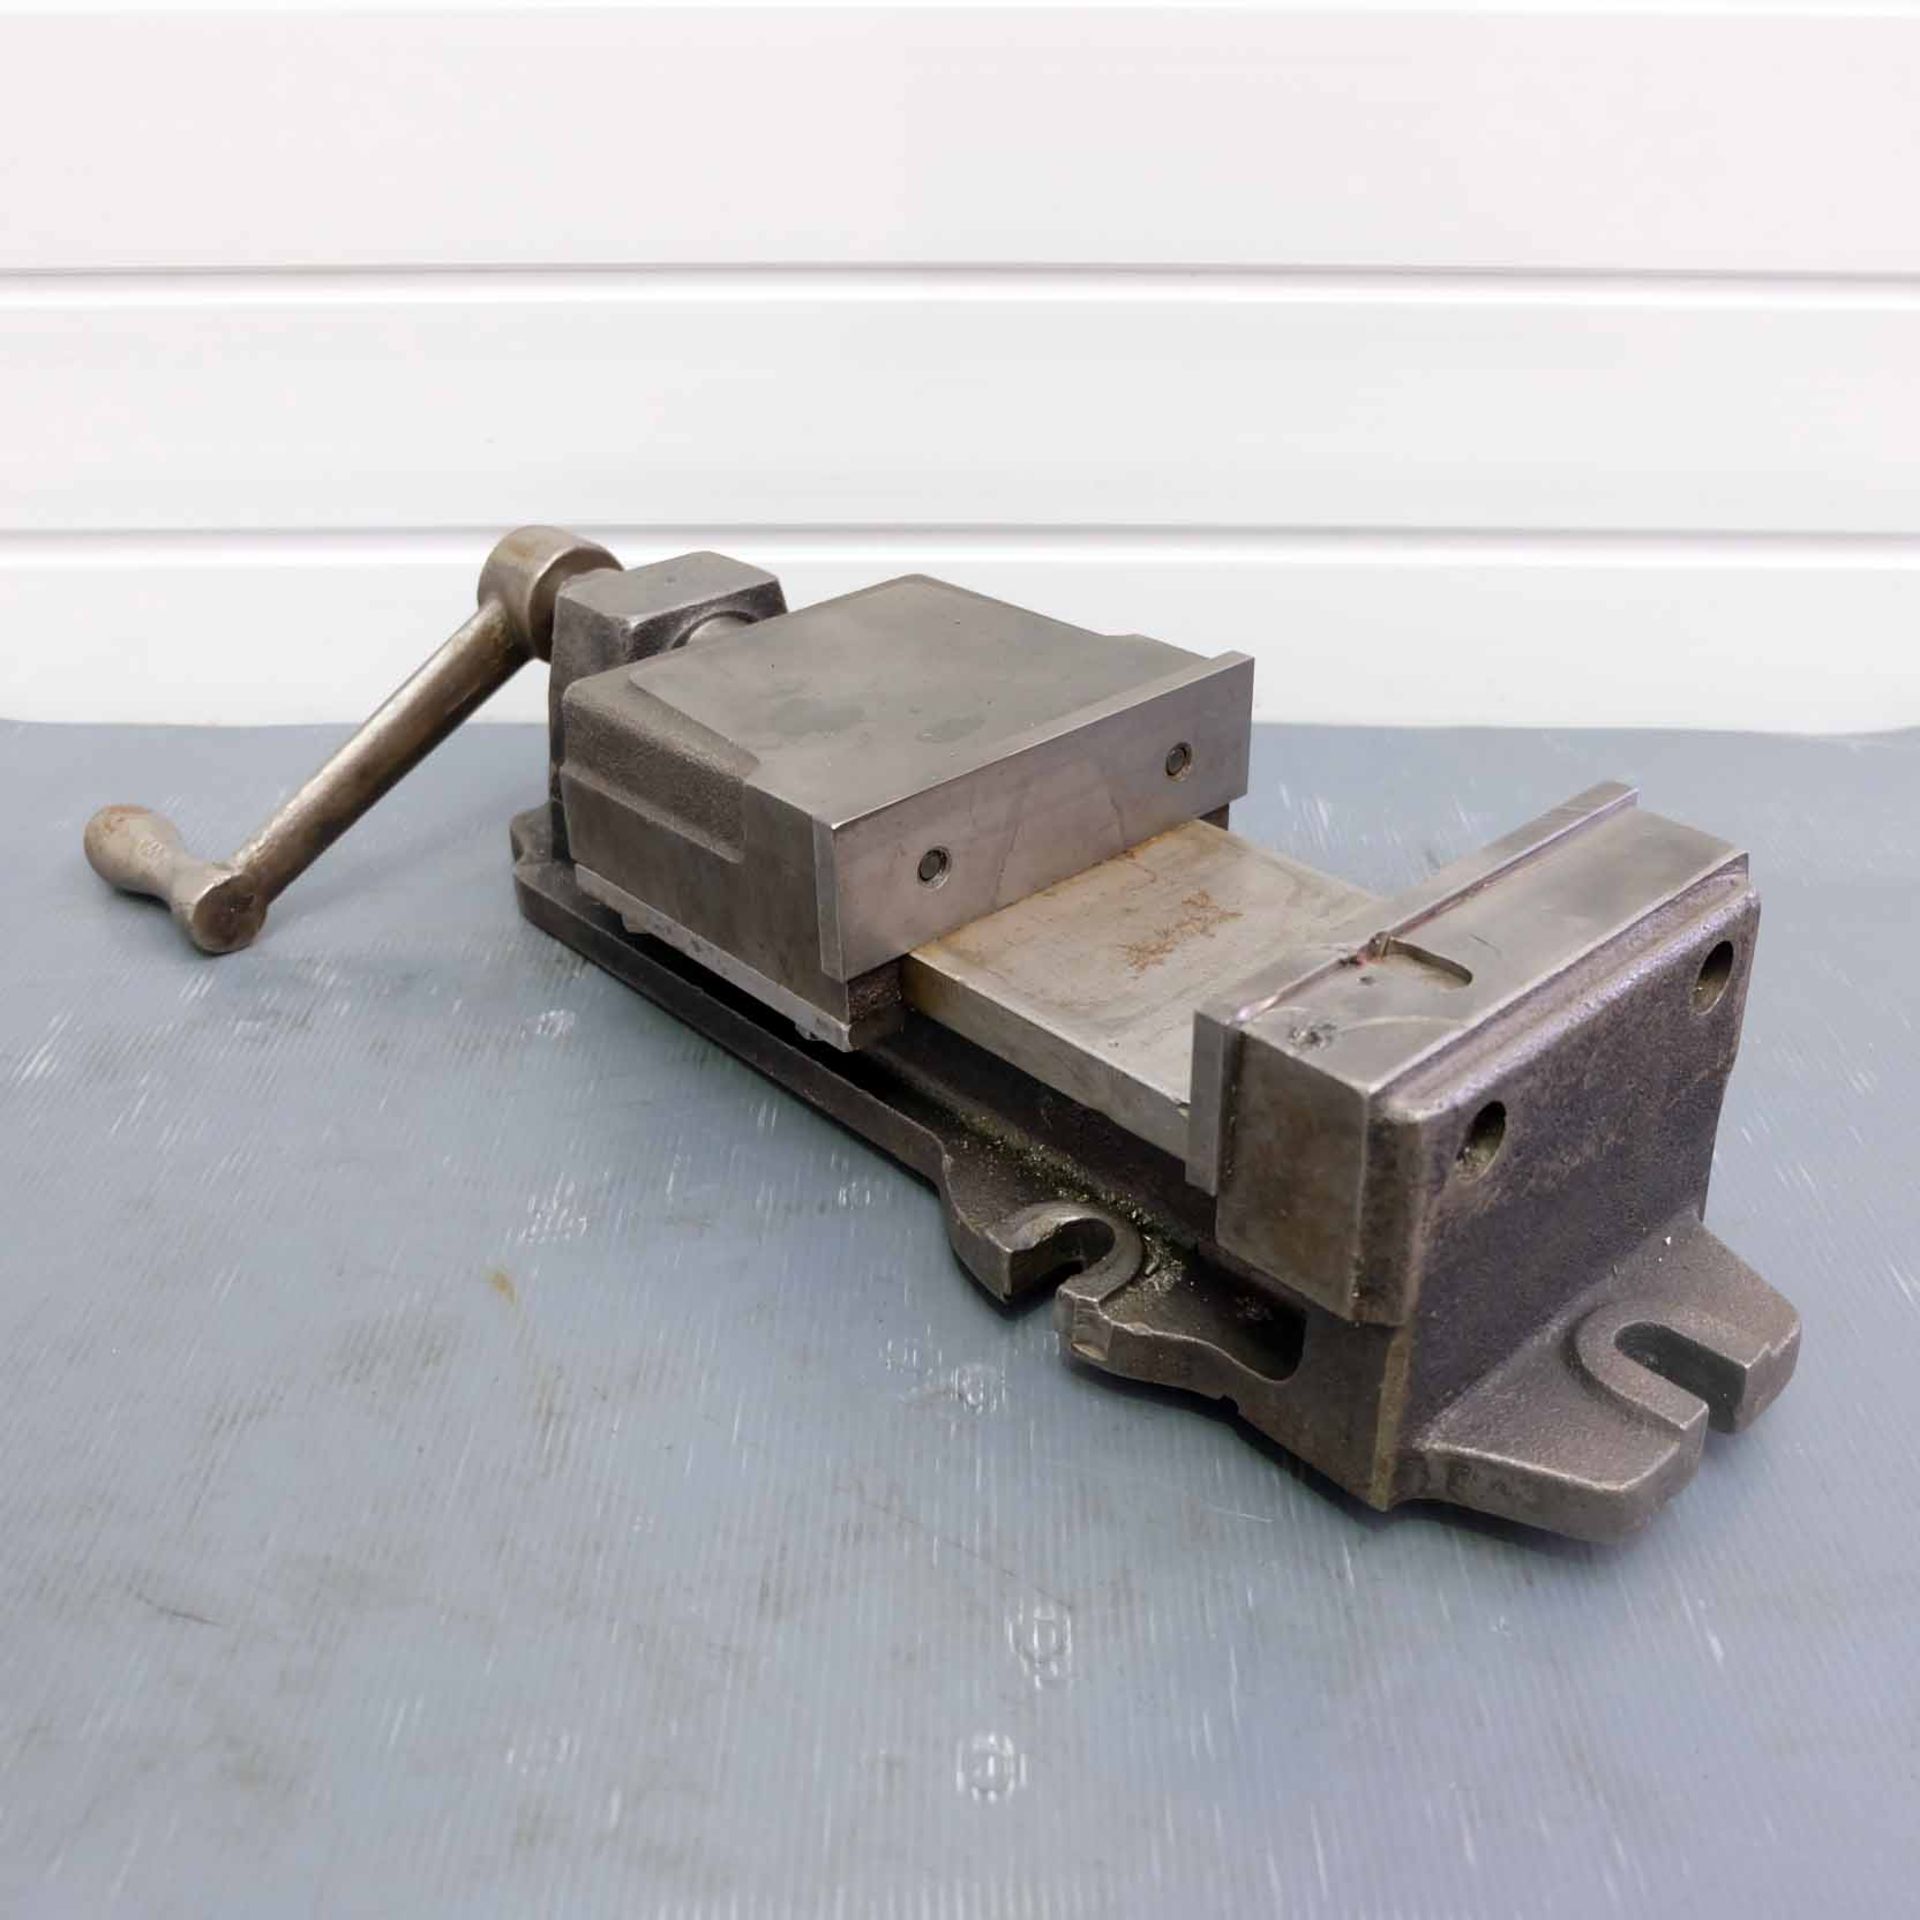 6" Machine Vice. Jaw Width 6". Jaw Depth 1 3/4". Max Opening 4 3/8". Overall Height 4 1/4". - Image 5 of 6